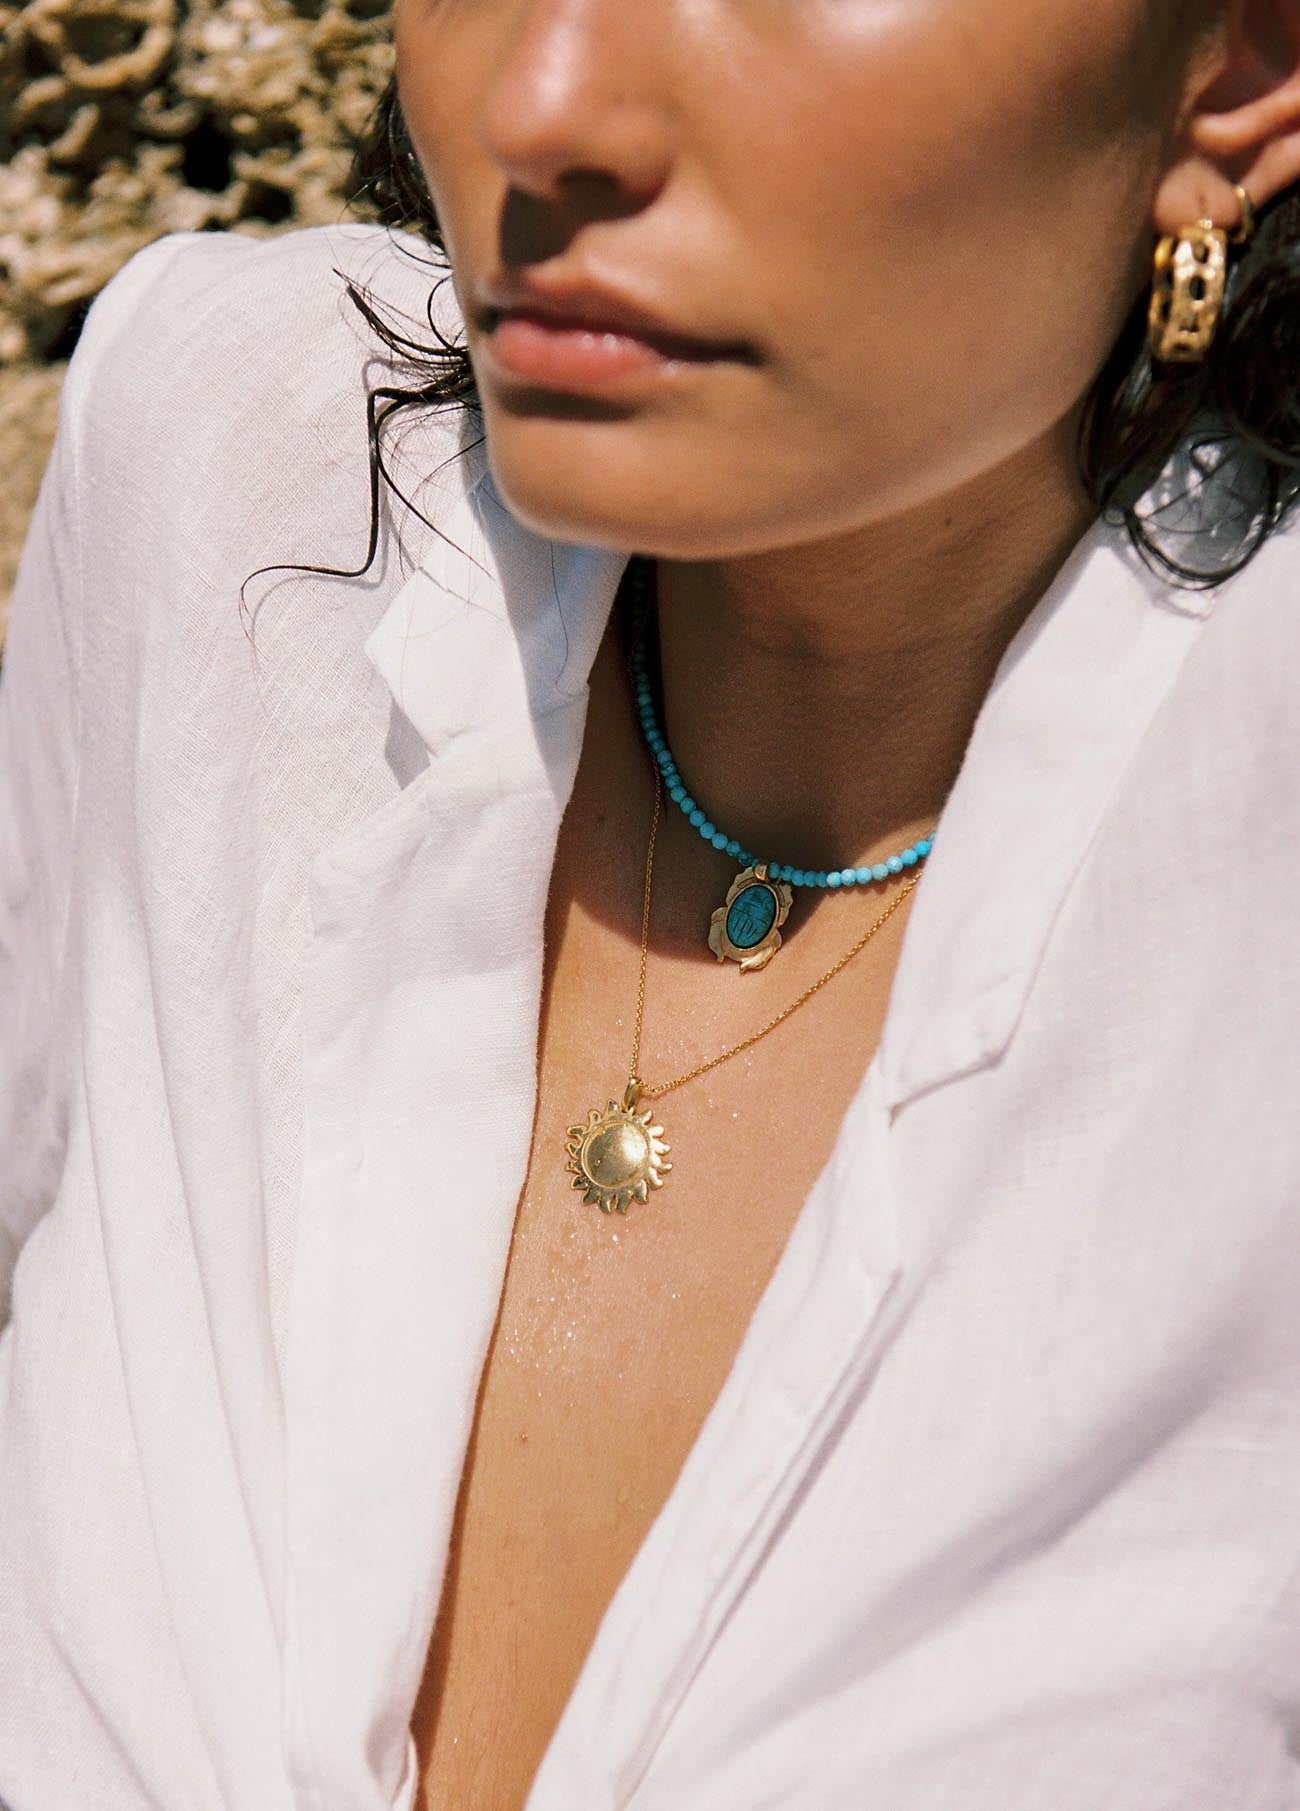 Turquoise choker with nefer charm and gold chain with a gold sun charm